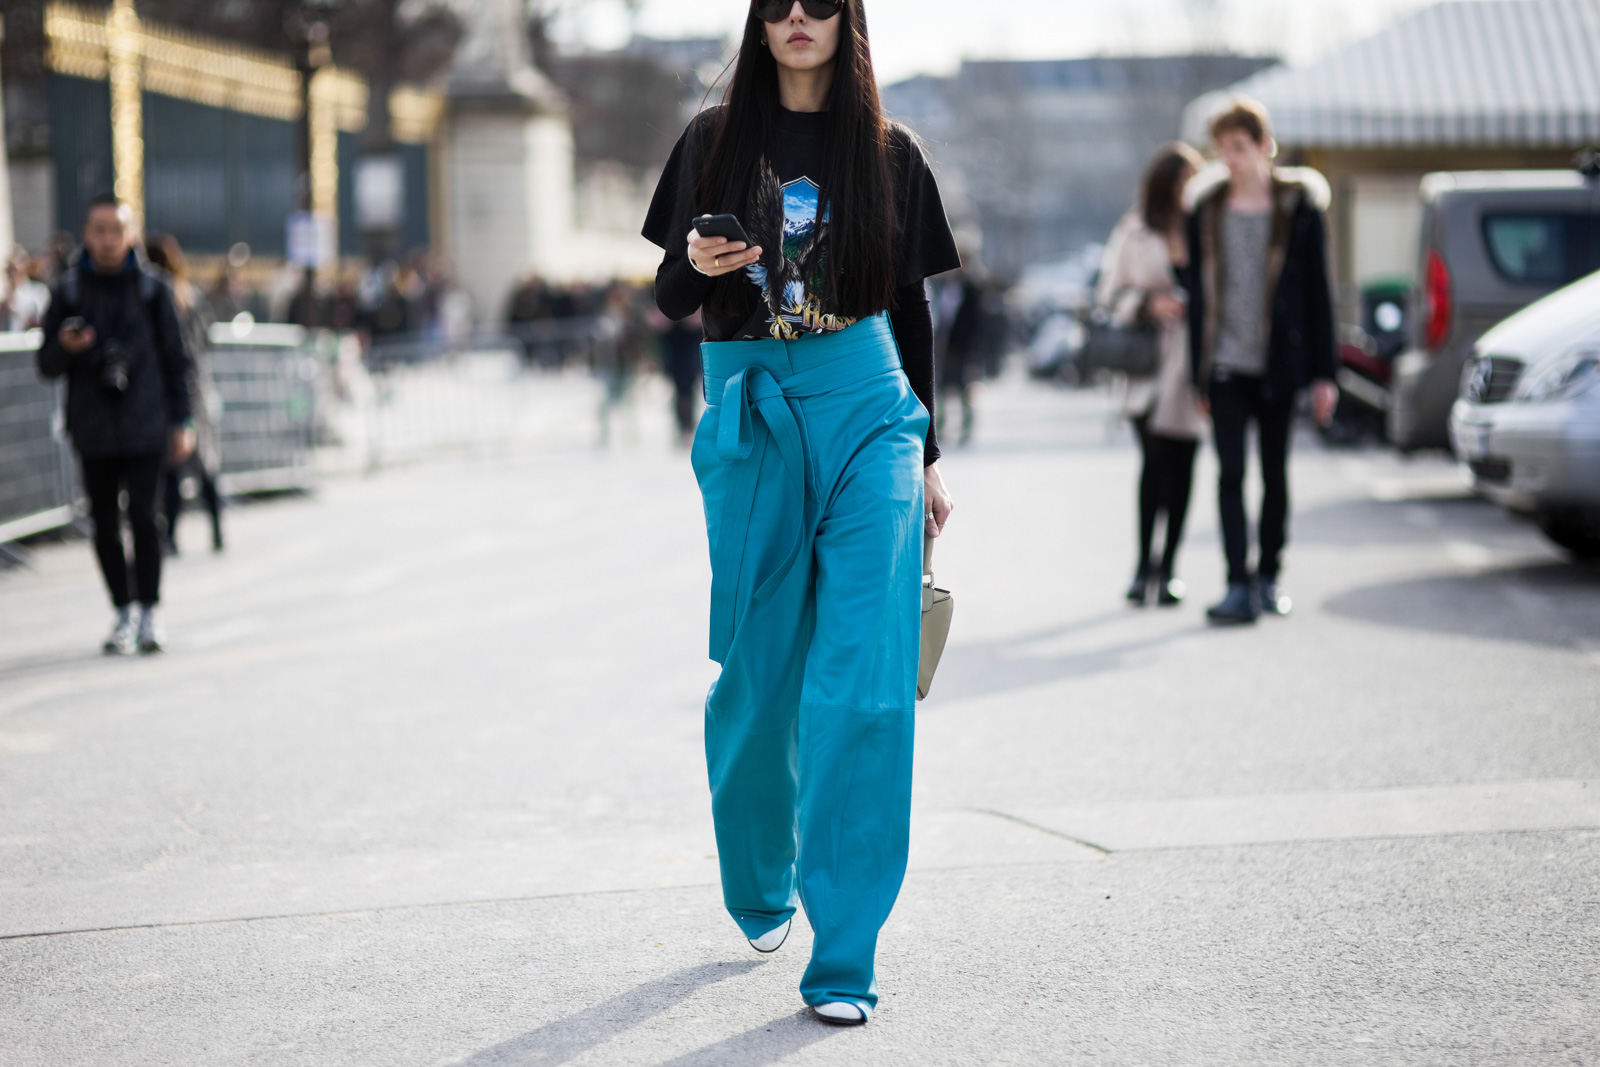 Gilda Ambrosio wearing leather Loewe pants and Loewe bag after the Elie Saab Fall /Winter 2015-2016 fashion show at the Tuileries in Paris, France